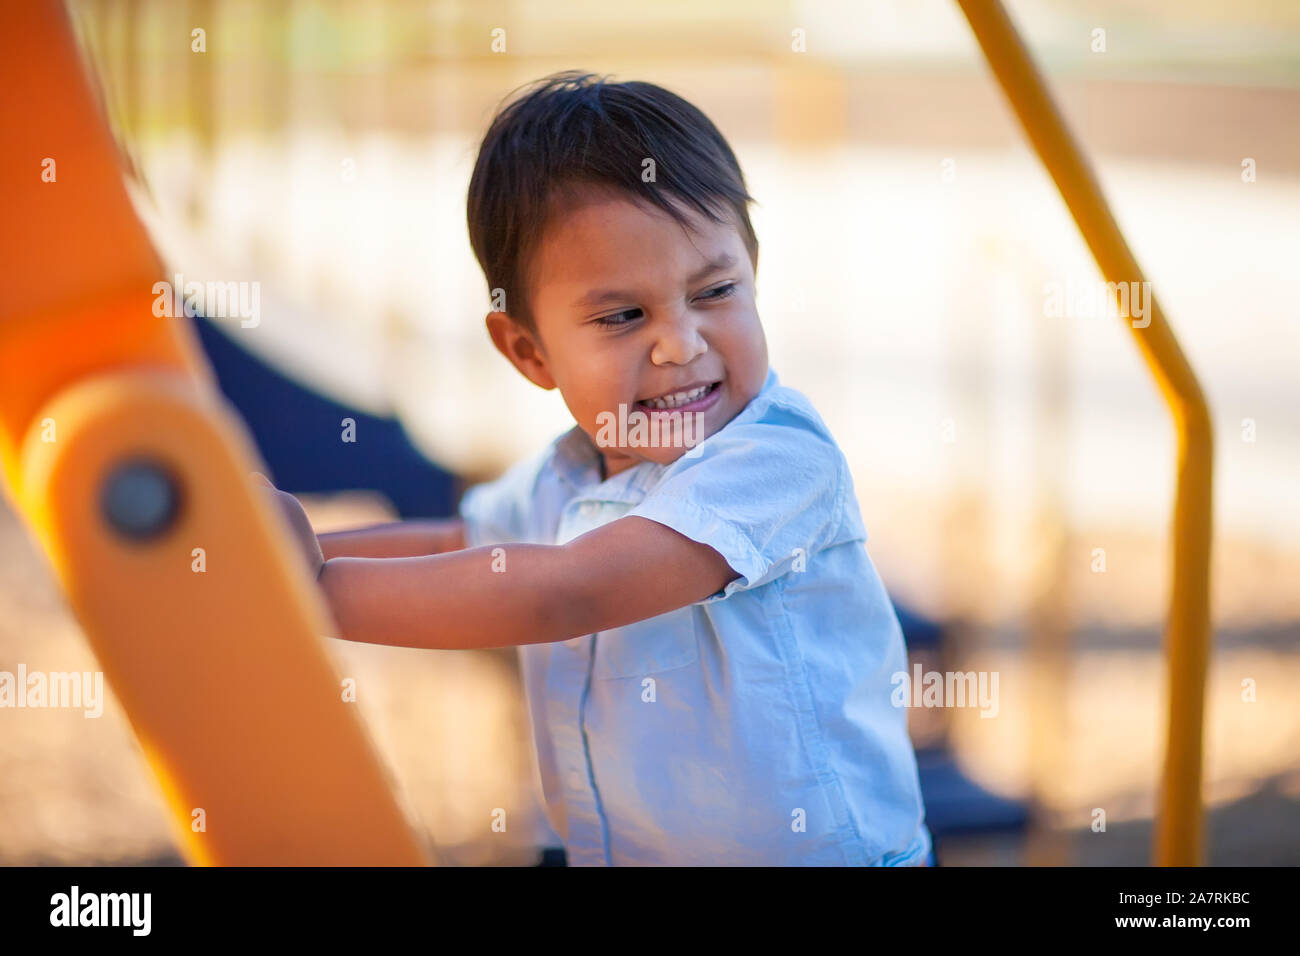 Young boy happy to climb up a playground ladder. Stock Photo